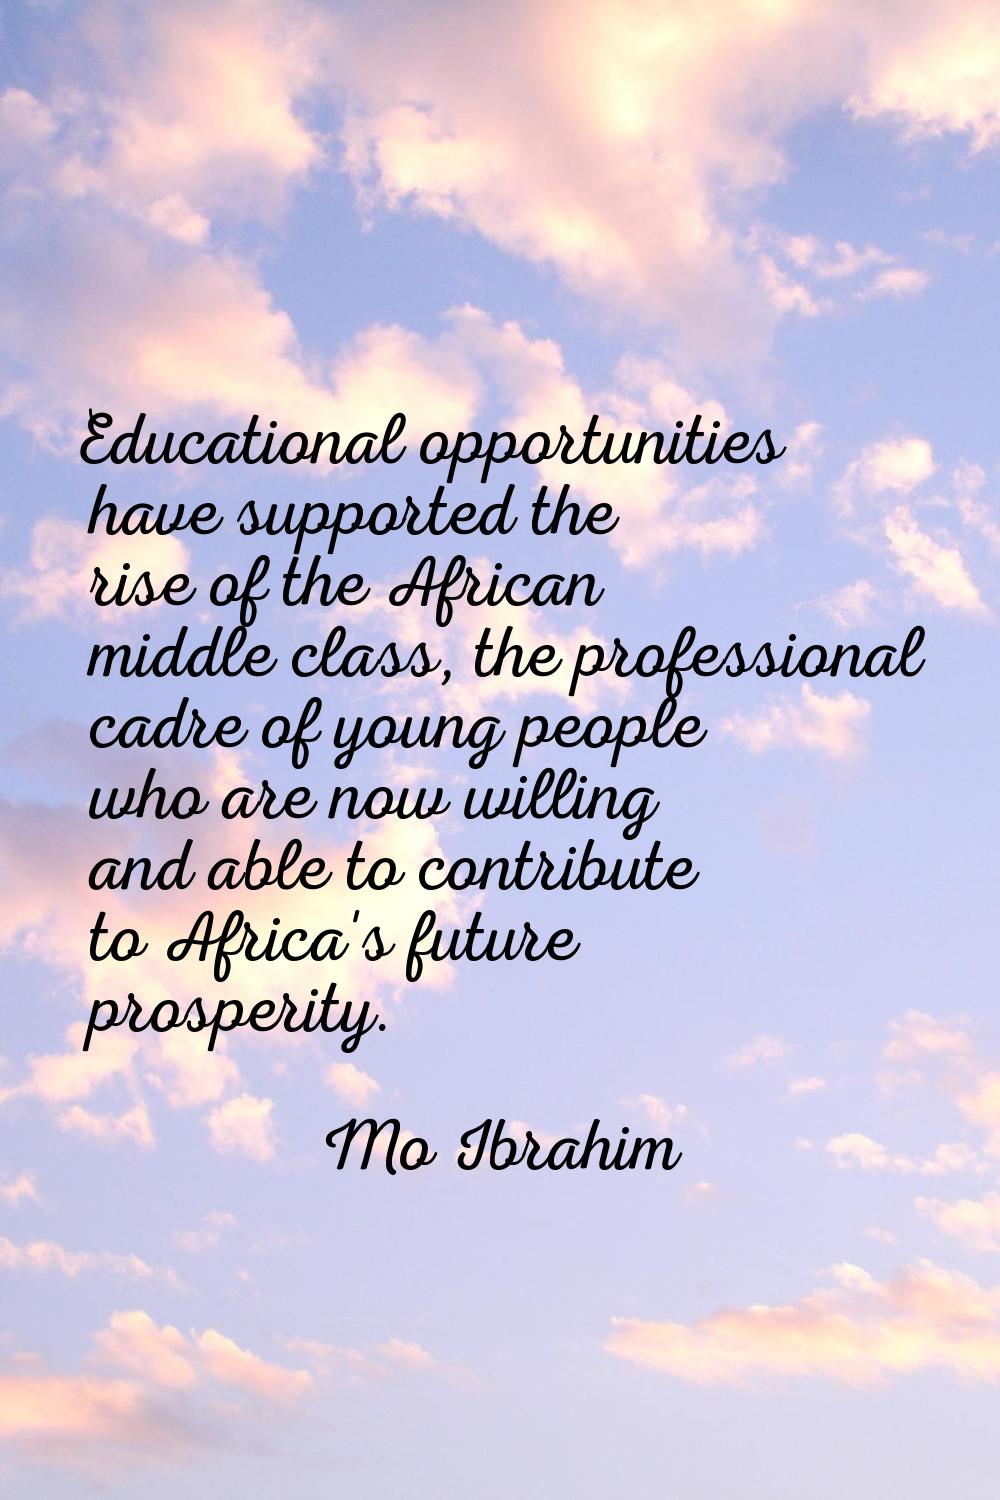 Educational opportunities have supported the rise of the African middle class, the professional cad